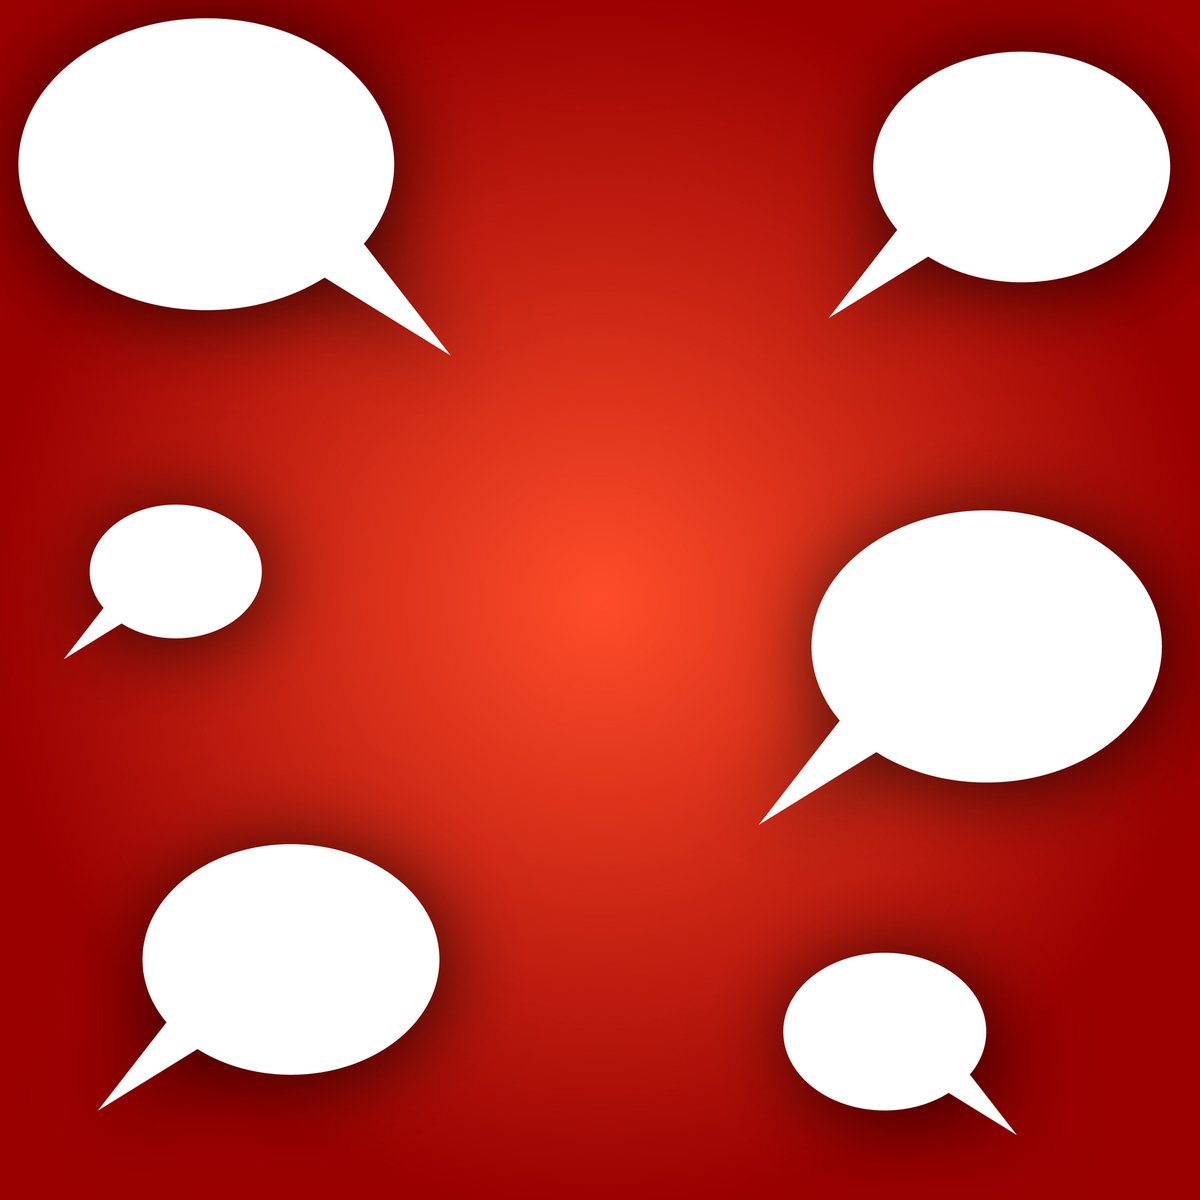 four different speech bubbles against a red background